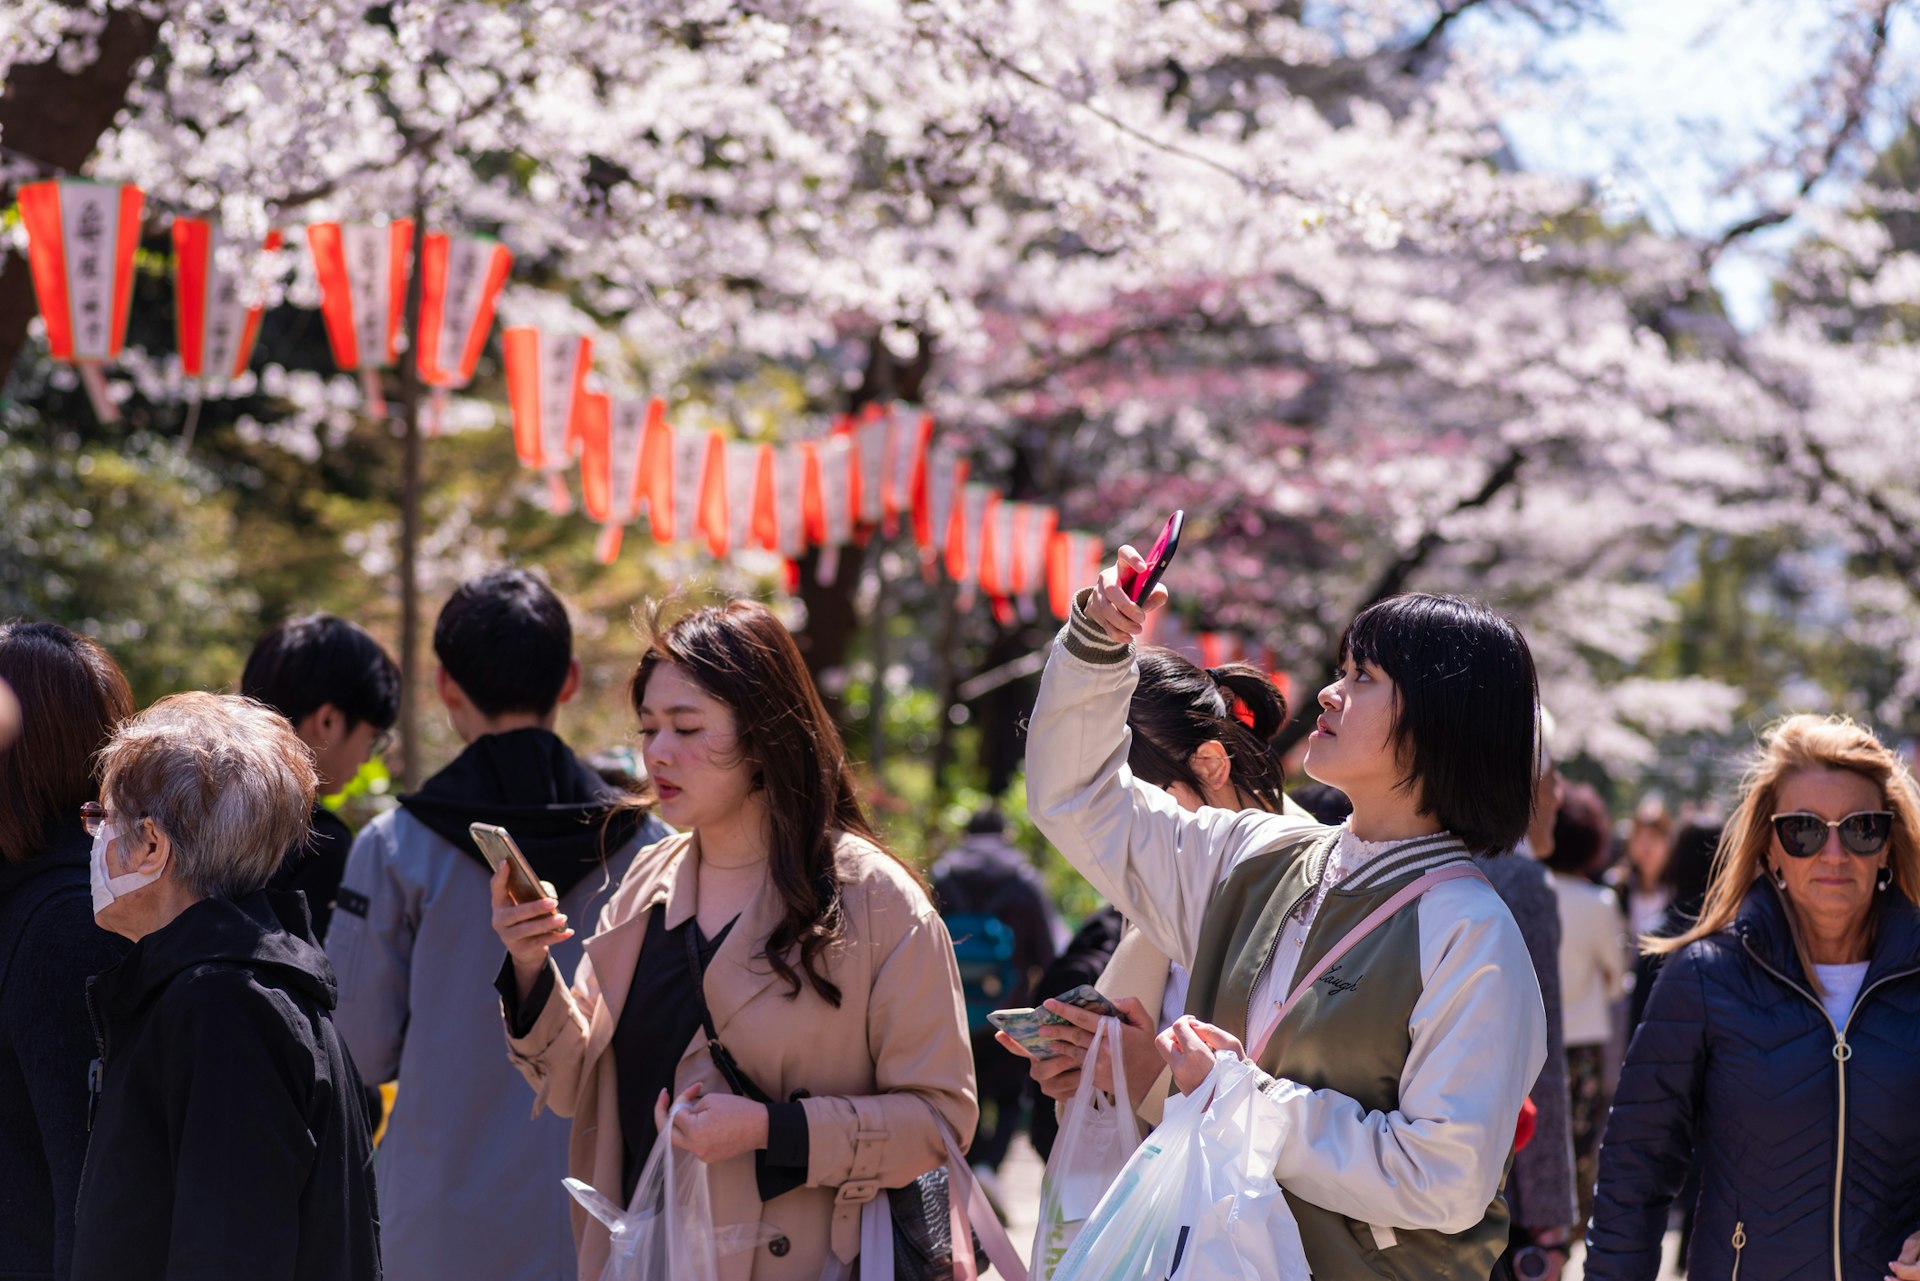 Japanese tourists admire cherry blossom in a park